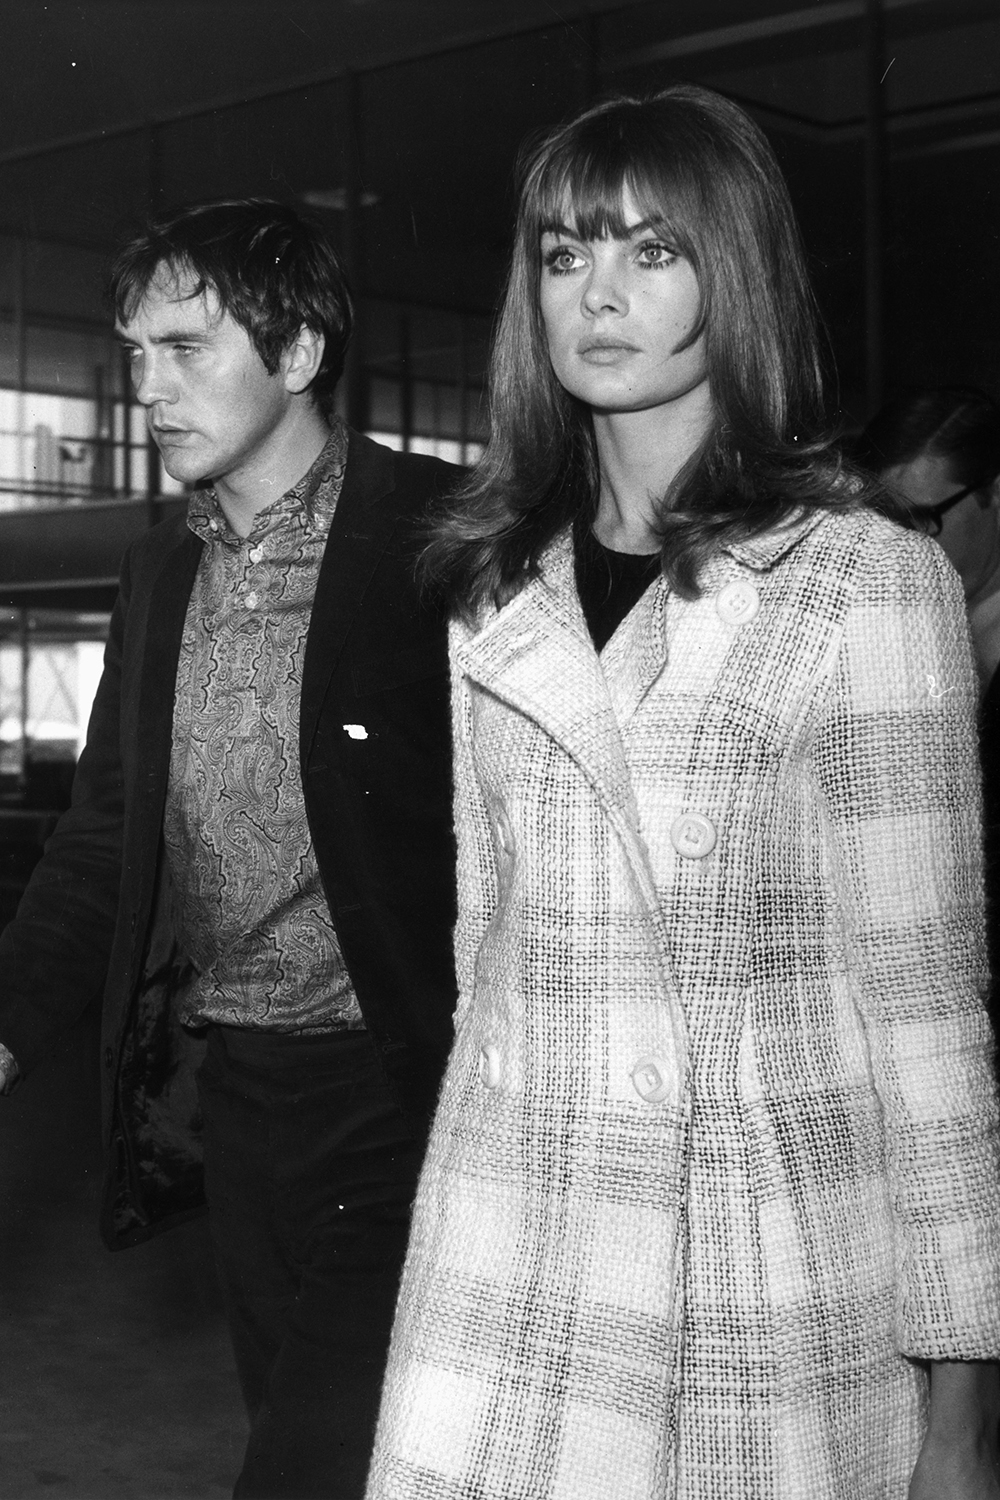 Jean Shrimpton and actor Terence Stamp were one of the most-photographed couples of 1965. Prior to her relationship with Stamp the 'Shrimp' dated British photographer David Bailey from 1960-1964.